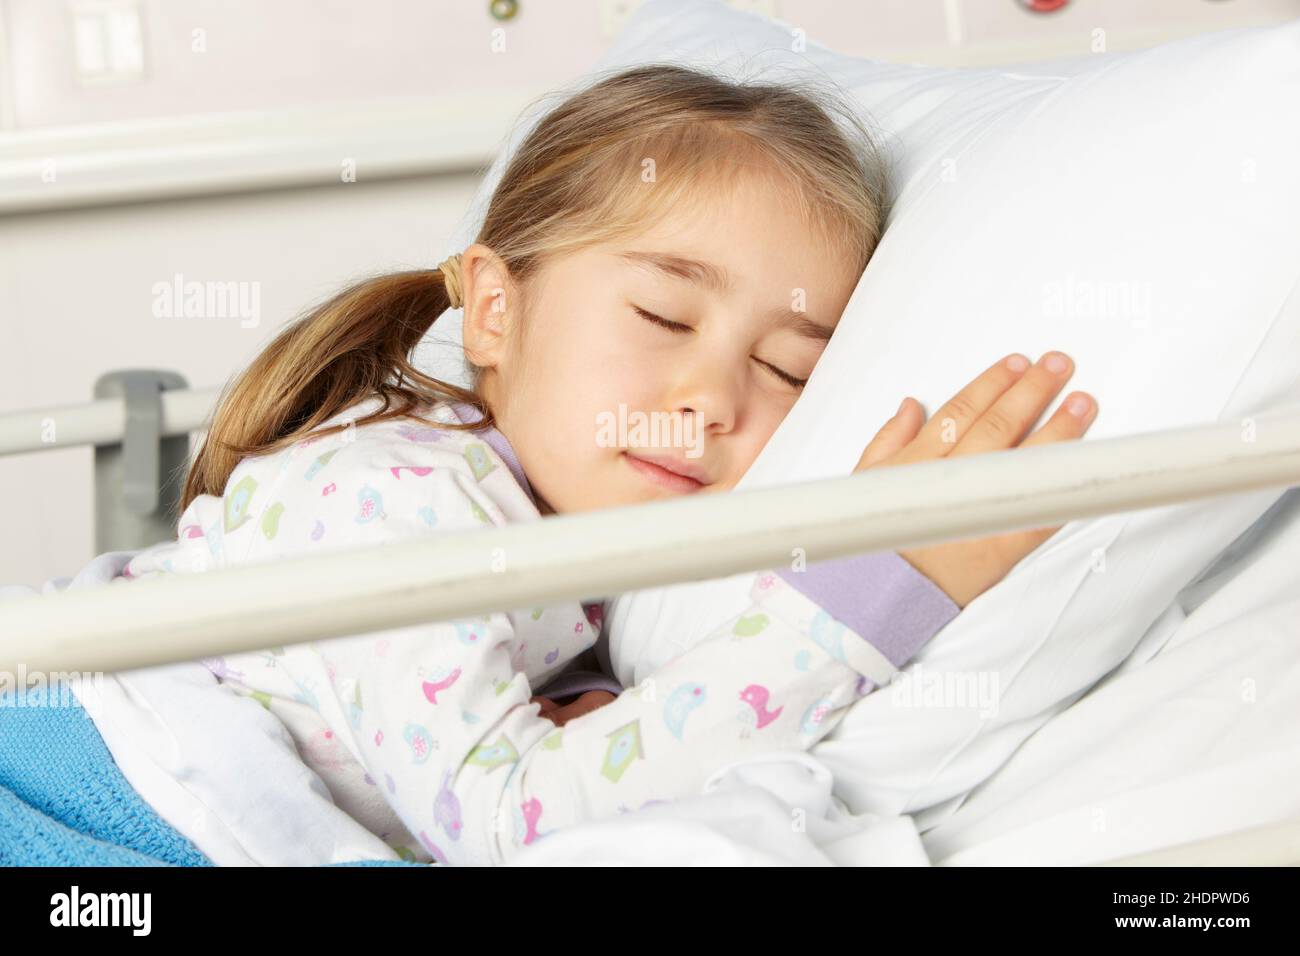 child, girl, sleeping, patient, hospital bed, children, childs, kid, kids, girls, sleep, to be asleep, to sleep, patients, clinic, hospital beds, Stock Photo